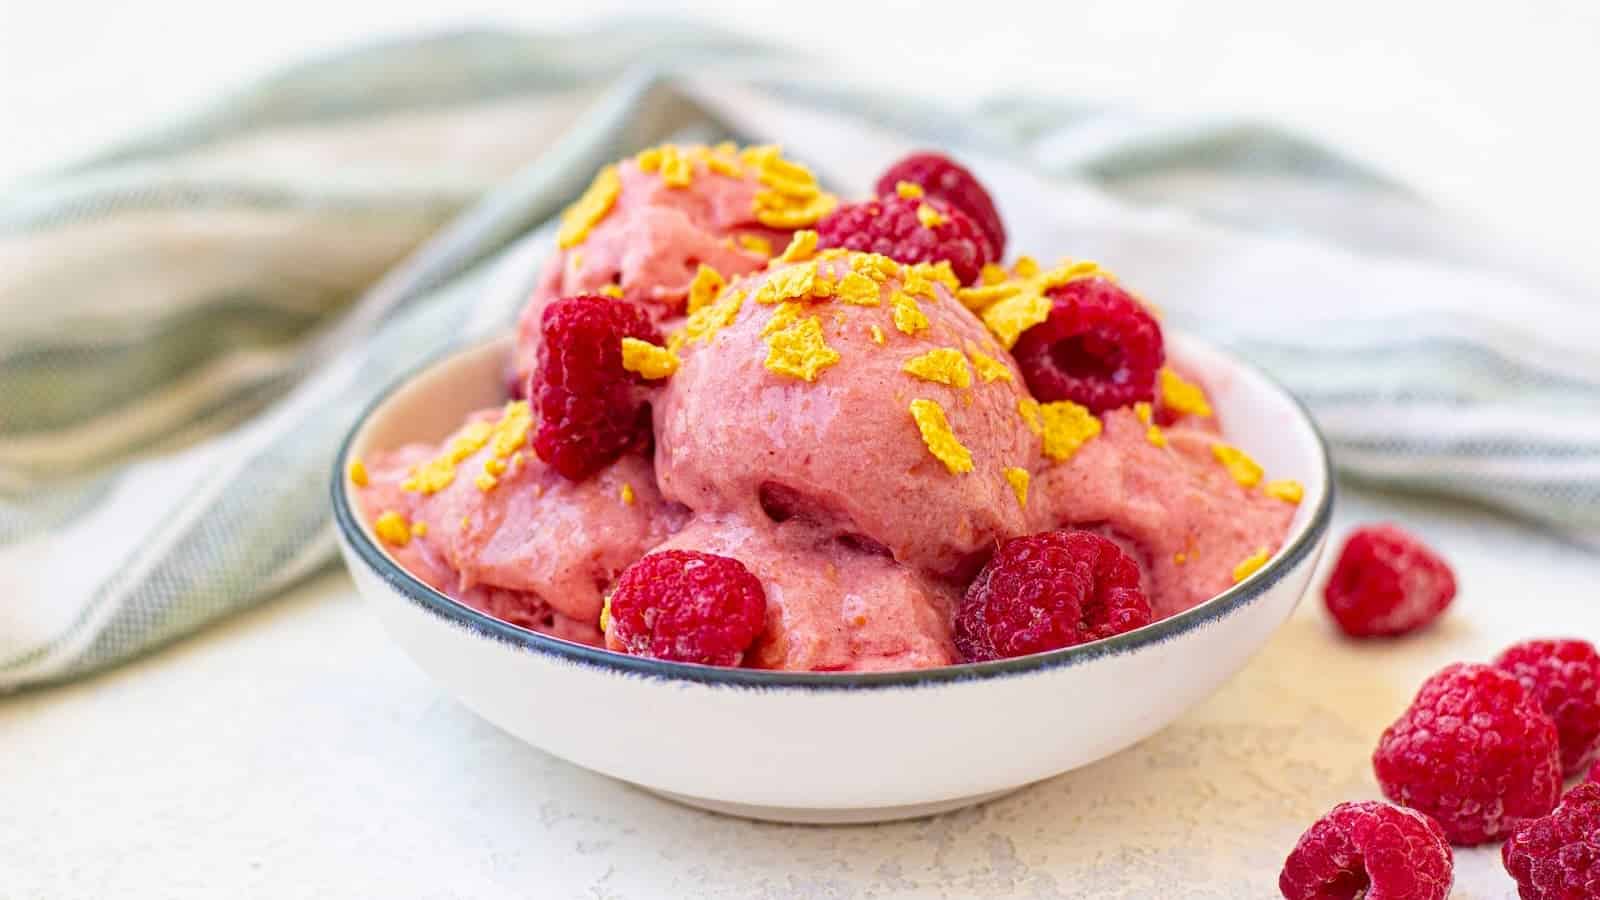 A bowl of frozen yogurt with raspberries and corn flakes.